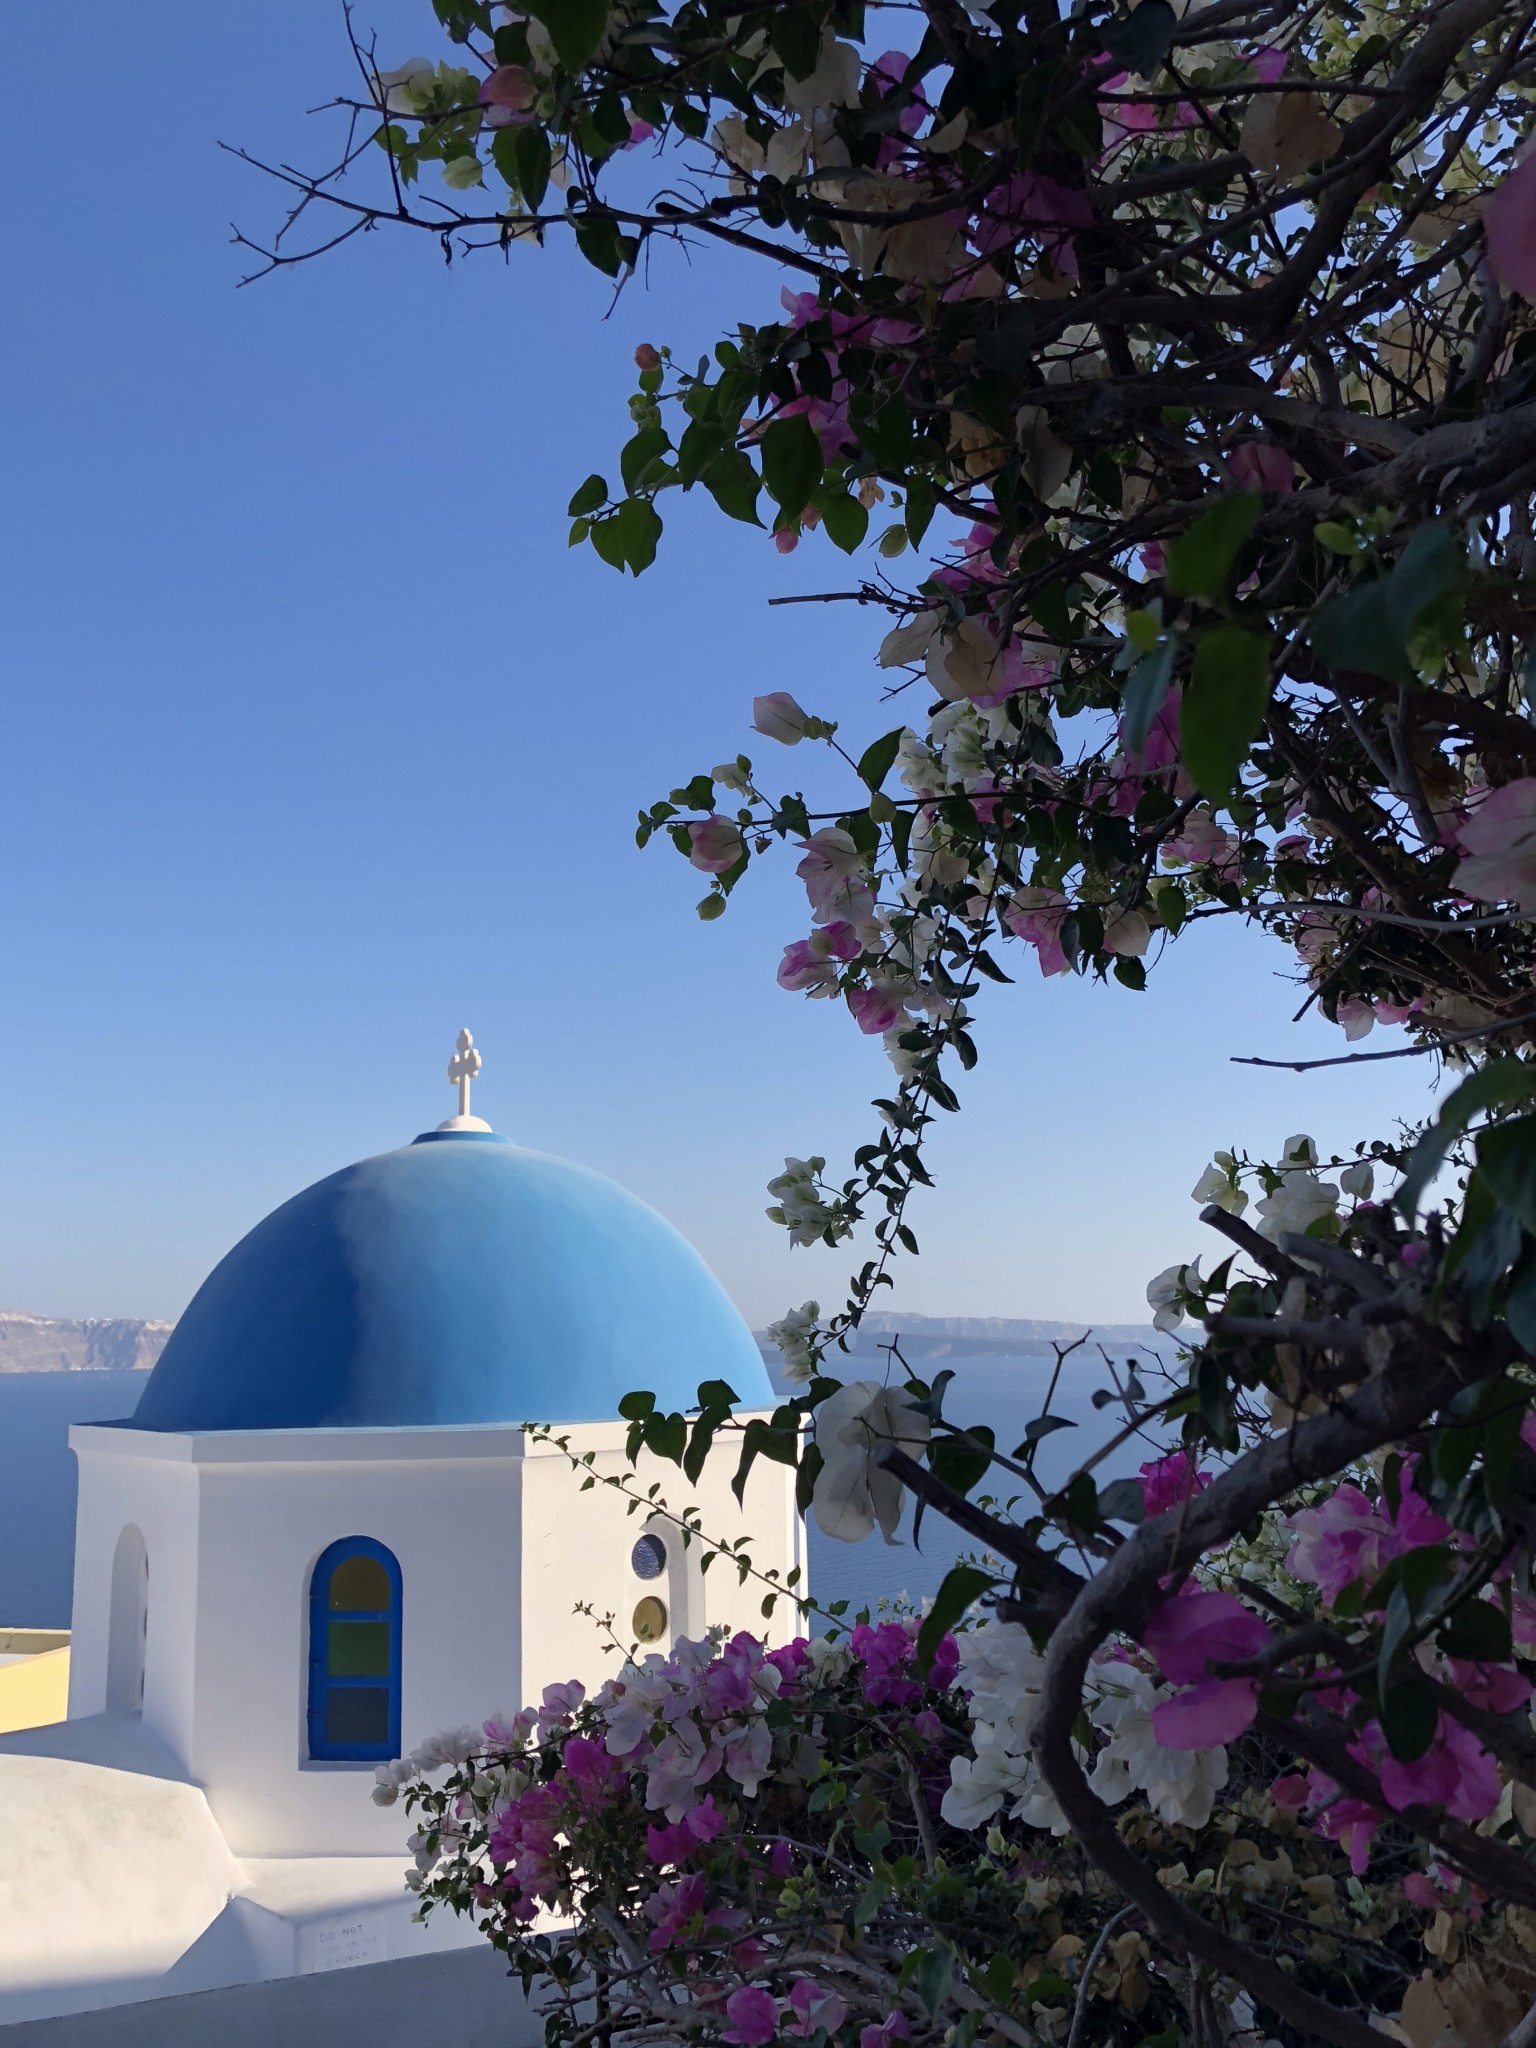 most instagrammable spots oia, santorini, the-alyst.com